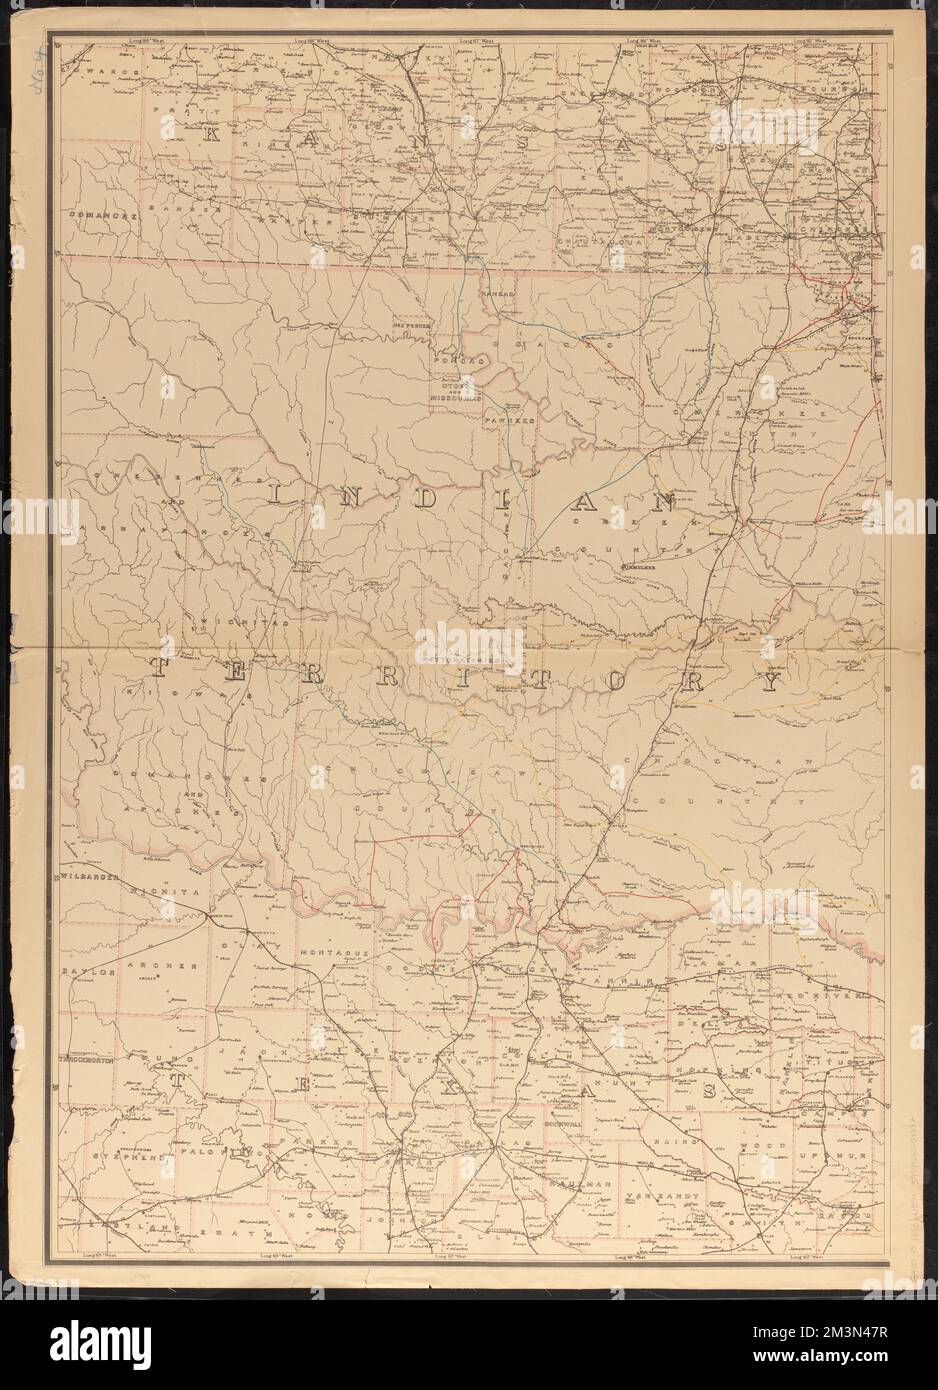 Post route map of the state of Arkansas and of the Indian Territory, with adjacent portions of Mississippi, Tennessee, Missouri, Kansas, Texas and Louisiana : showing post offices, with the intermediate distances between them and mail routes in operation on 1st August 1883 , Postal service, Arkansas, Maps, Postal service, Oklahoma, Maps, Arkansas, Maps, Oklahoma, Maps, Indian Territory, Maps Norman B. Leventhal Map Center Collection Stock Photo